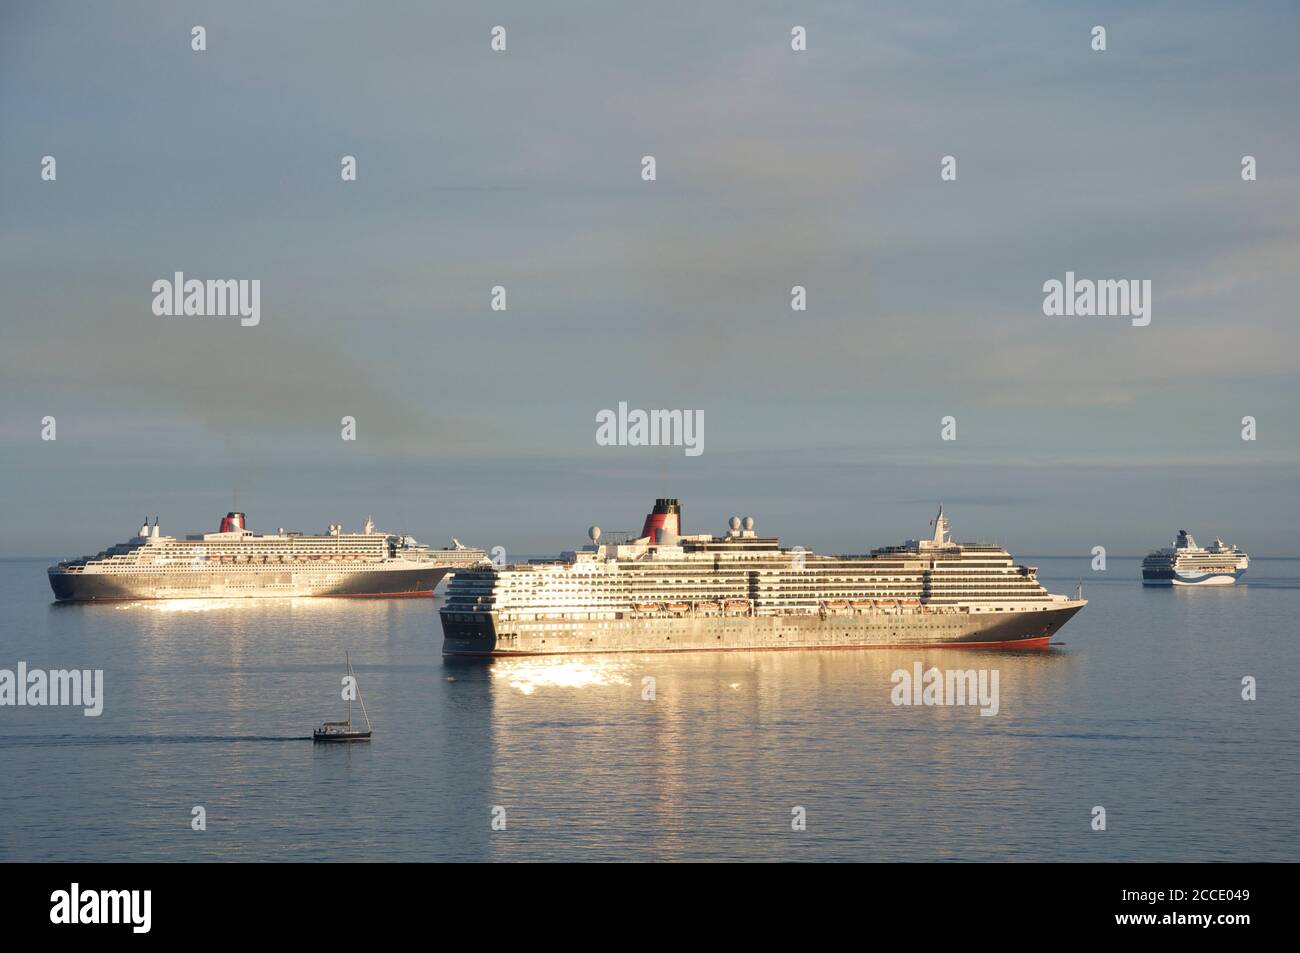 Cruise ships: Queen Victoria, Queen Mary 2, Marella Explorer and Marella Discovery anchored in Weymouth Bay. Mothballed during the Covid-19 pandemic. Stock Photo